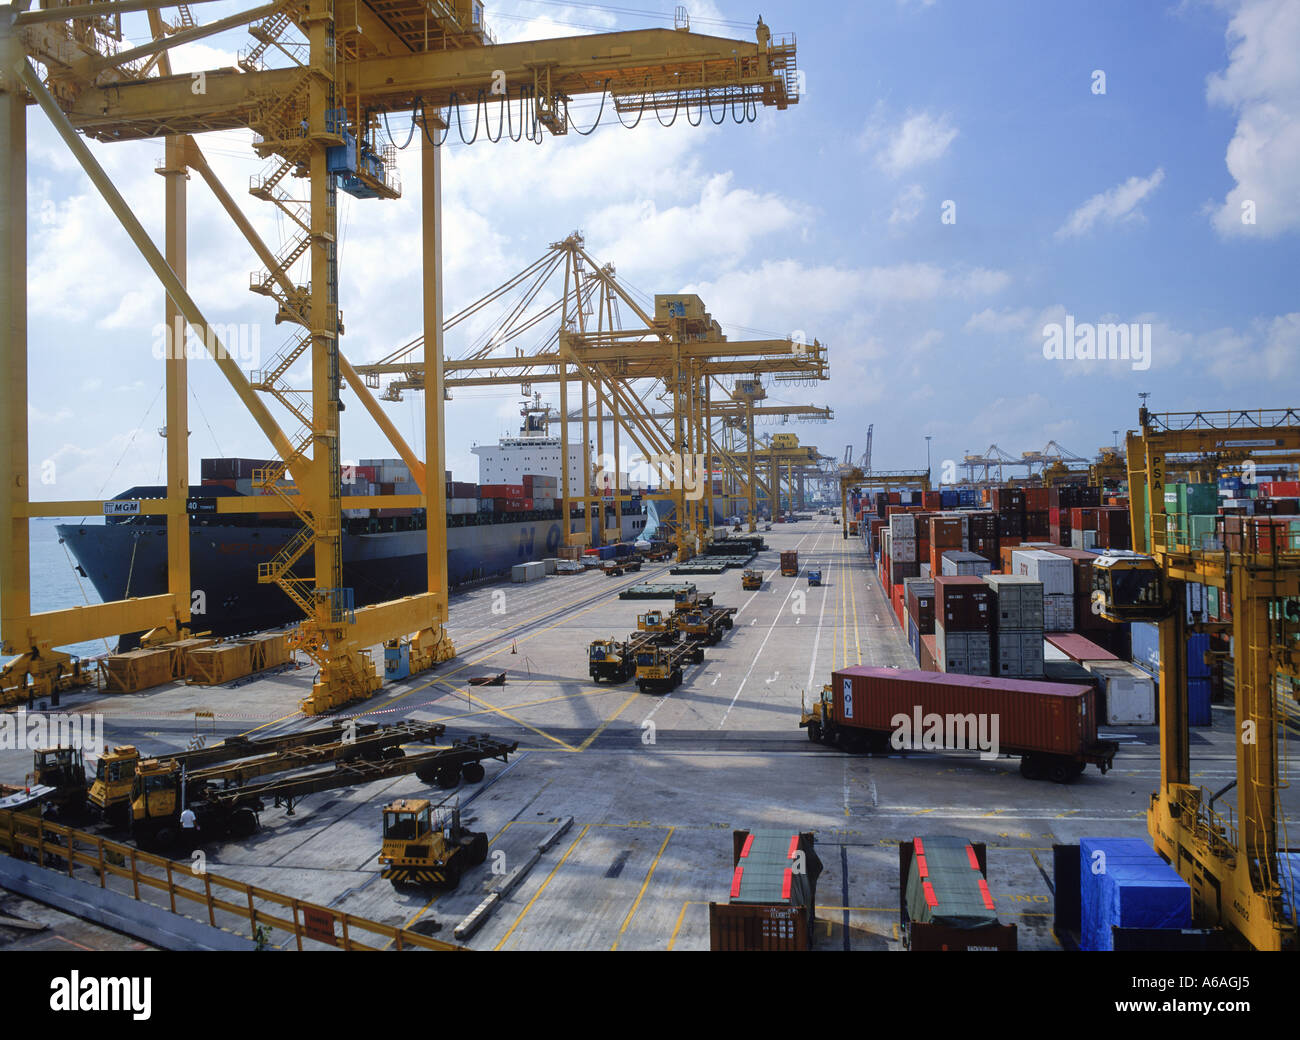 Cargo loading docks and ships in Singapore Harbour Stock Photo